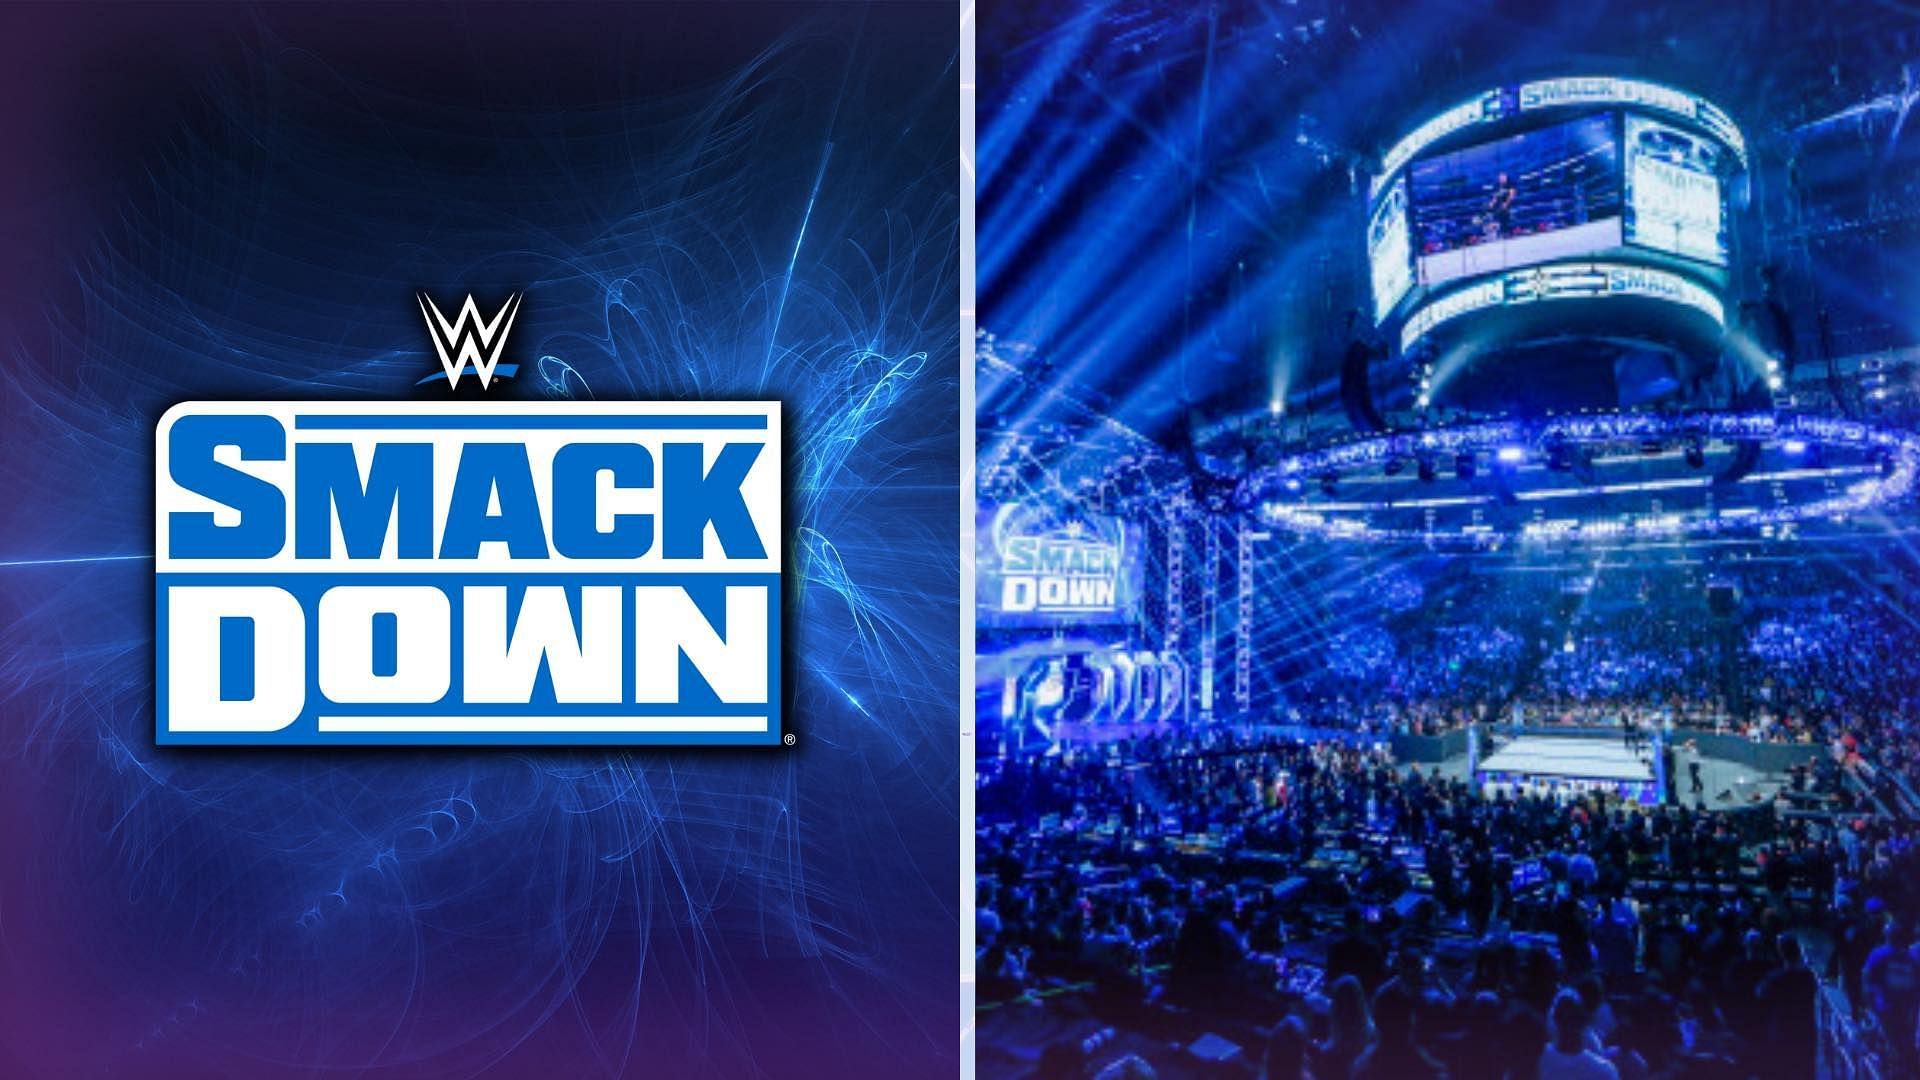 WWE SmackDown this week will be live from the State Farm Arena in Atlanta, Georgia